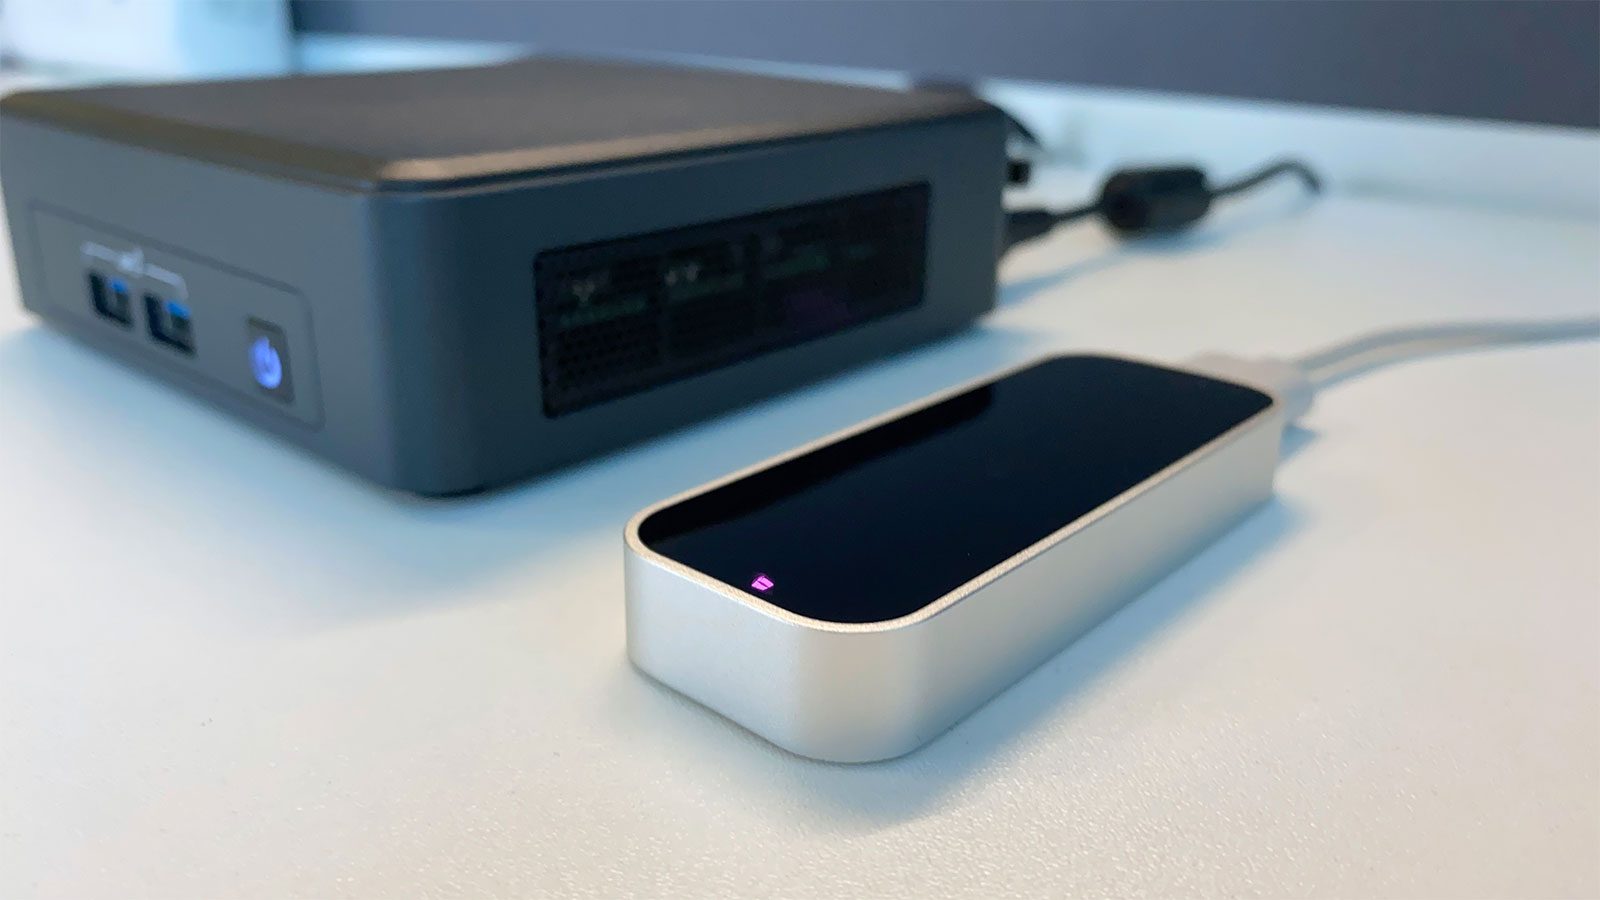 Leap Motion Controller and Simply NUC mini PC